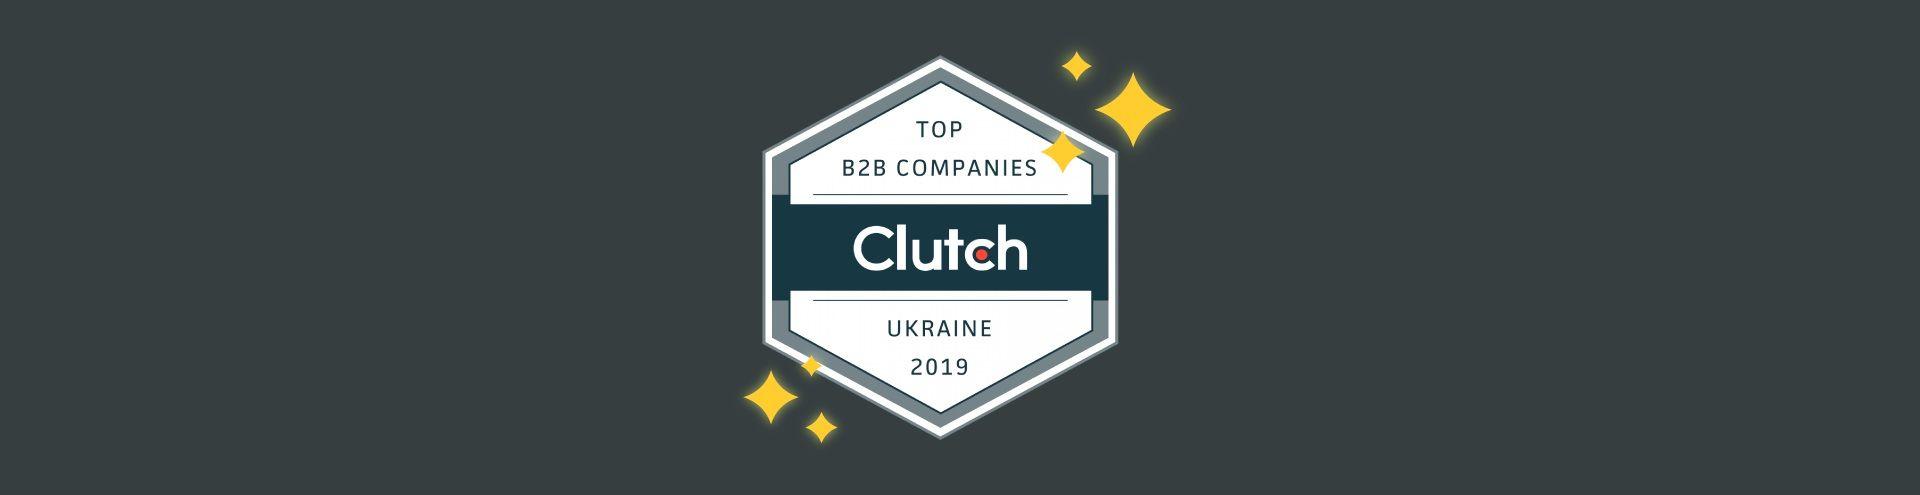 Apiko Recognized as a Top B2B Company by Clutch!